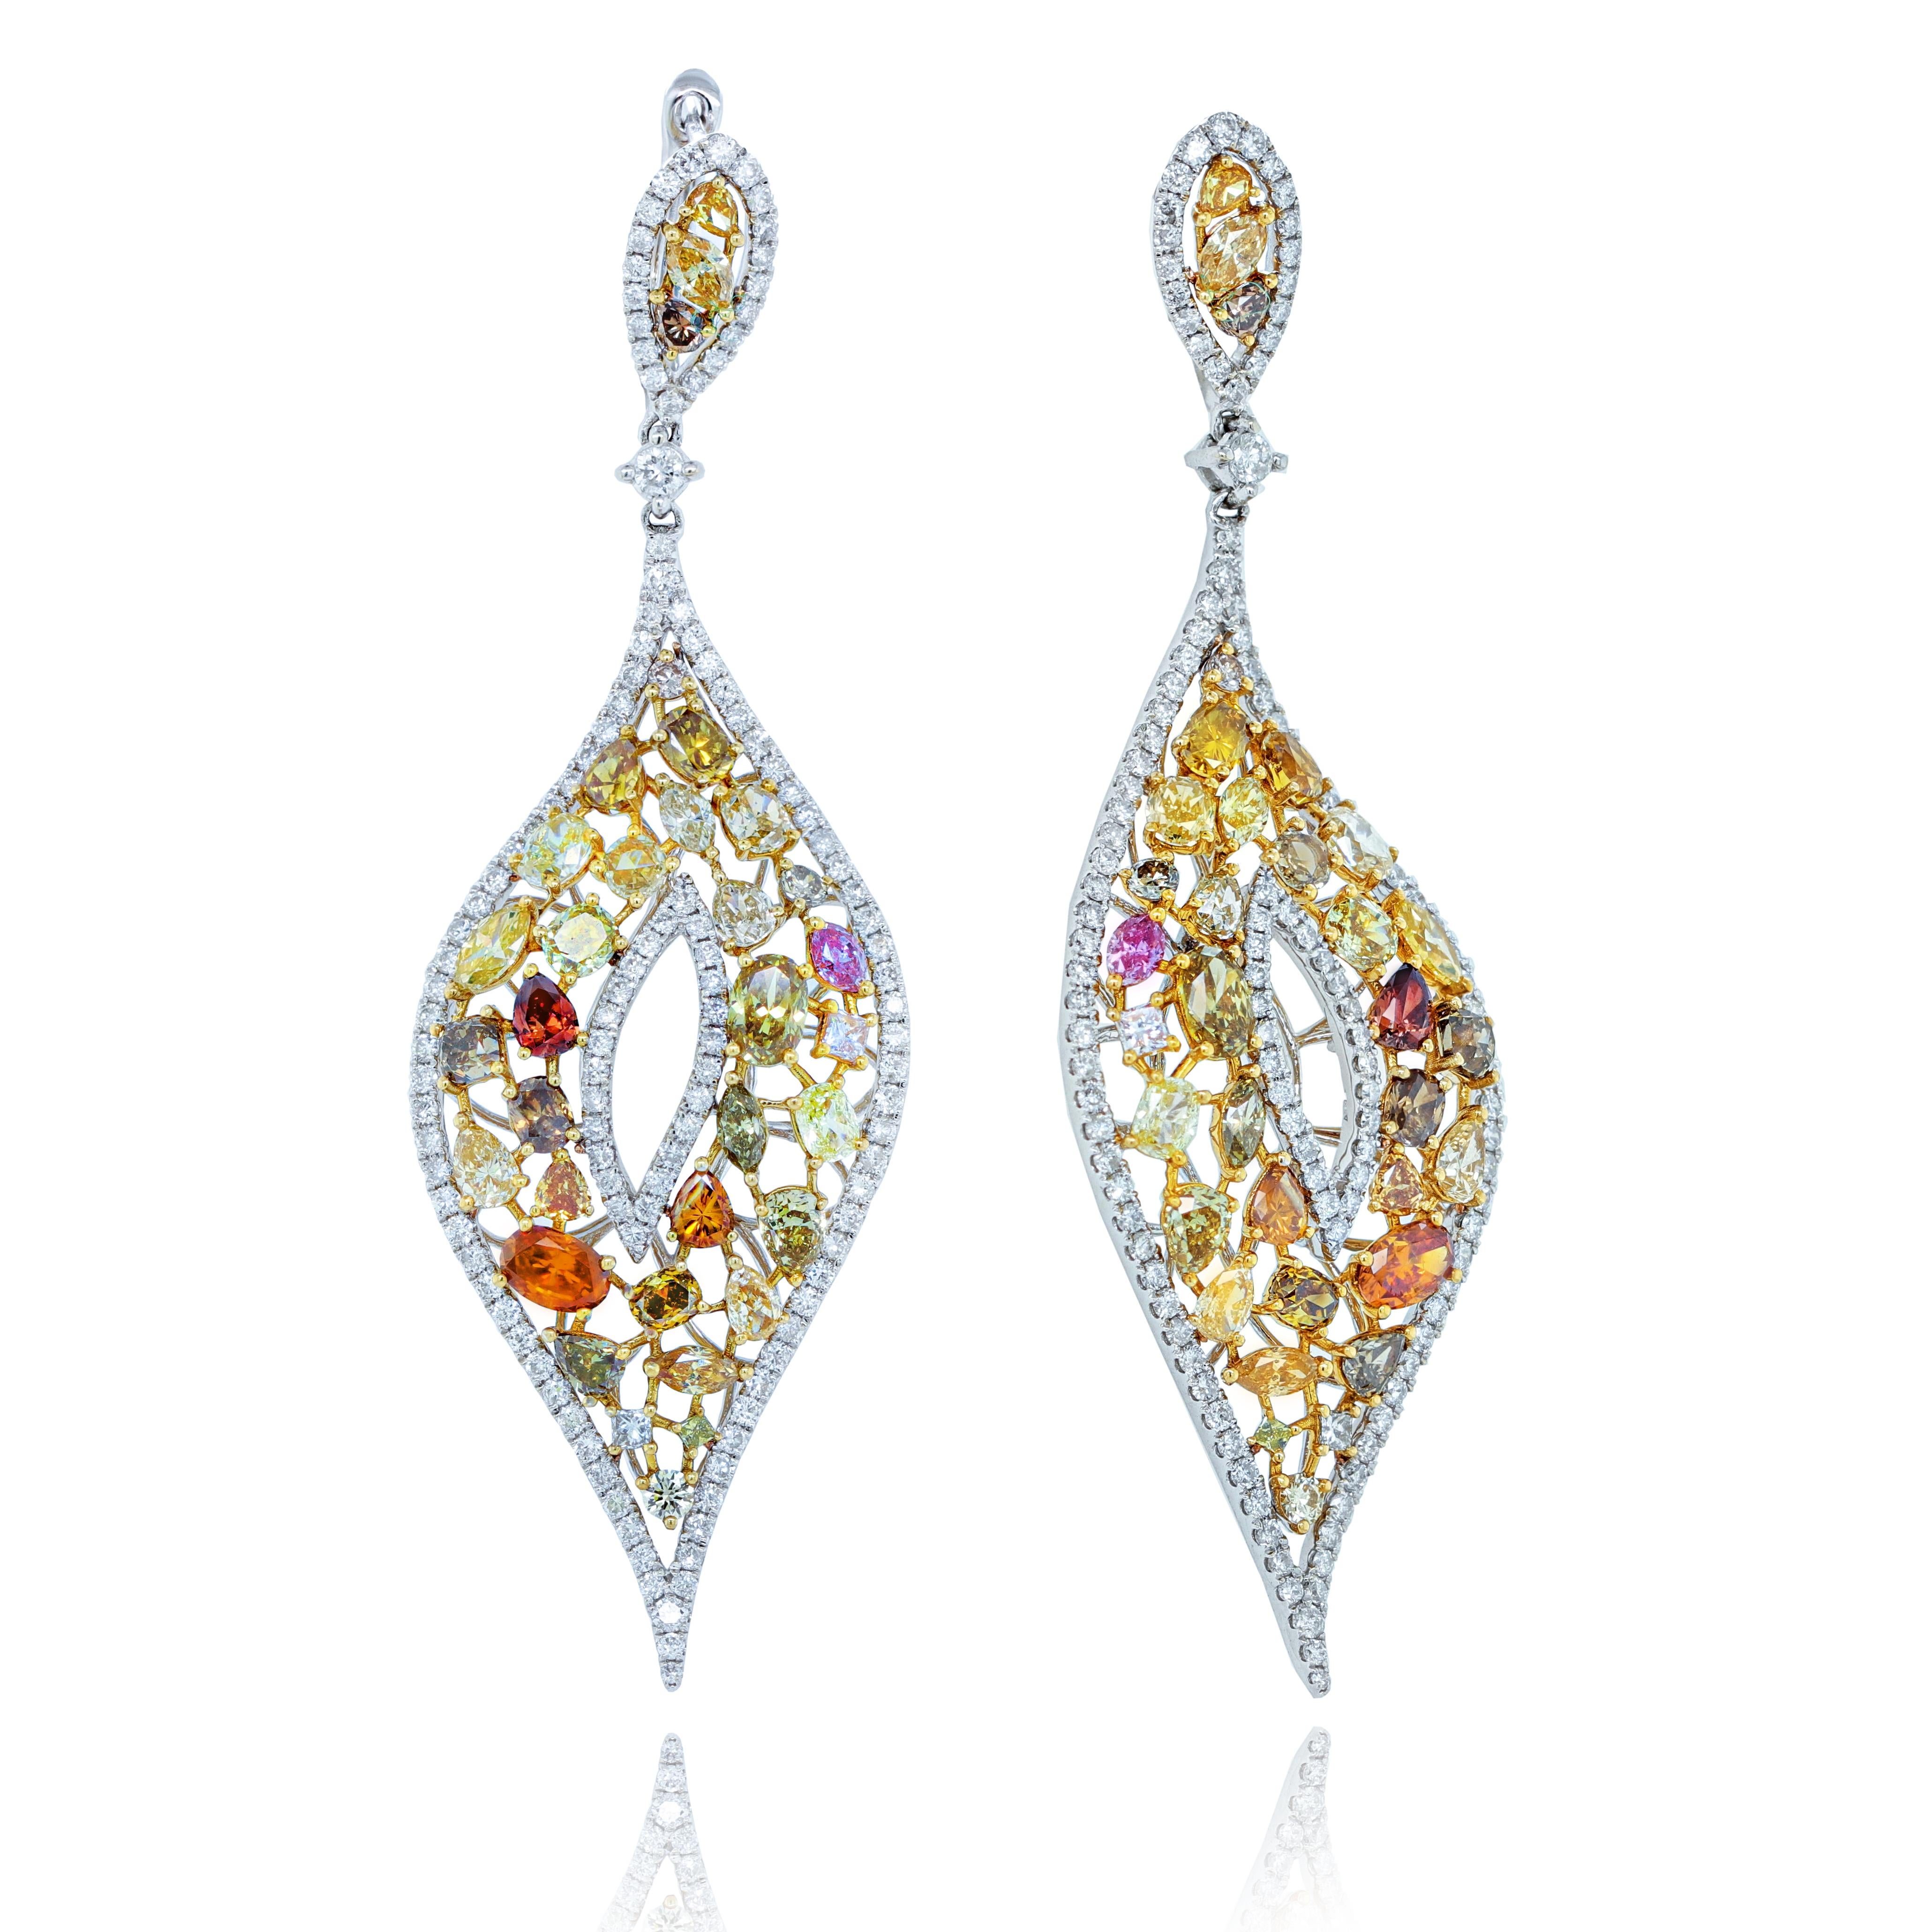 18K White and Yellow gold  diamond earrings features 11.50 carats of multi-colored diamonds, yellow, brown and white diamonds. 
